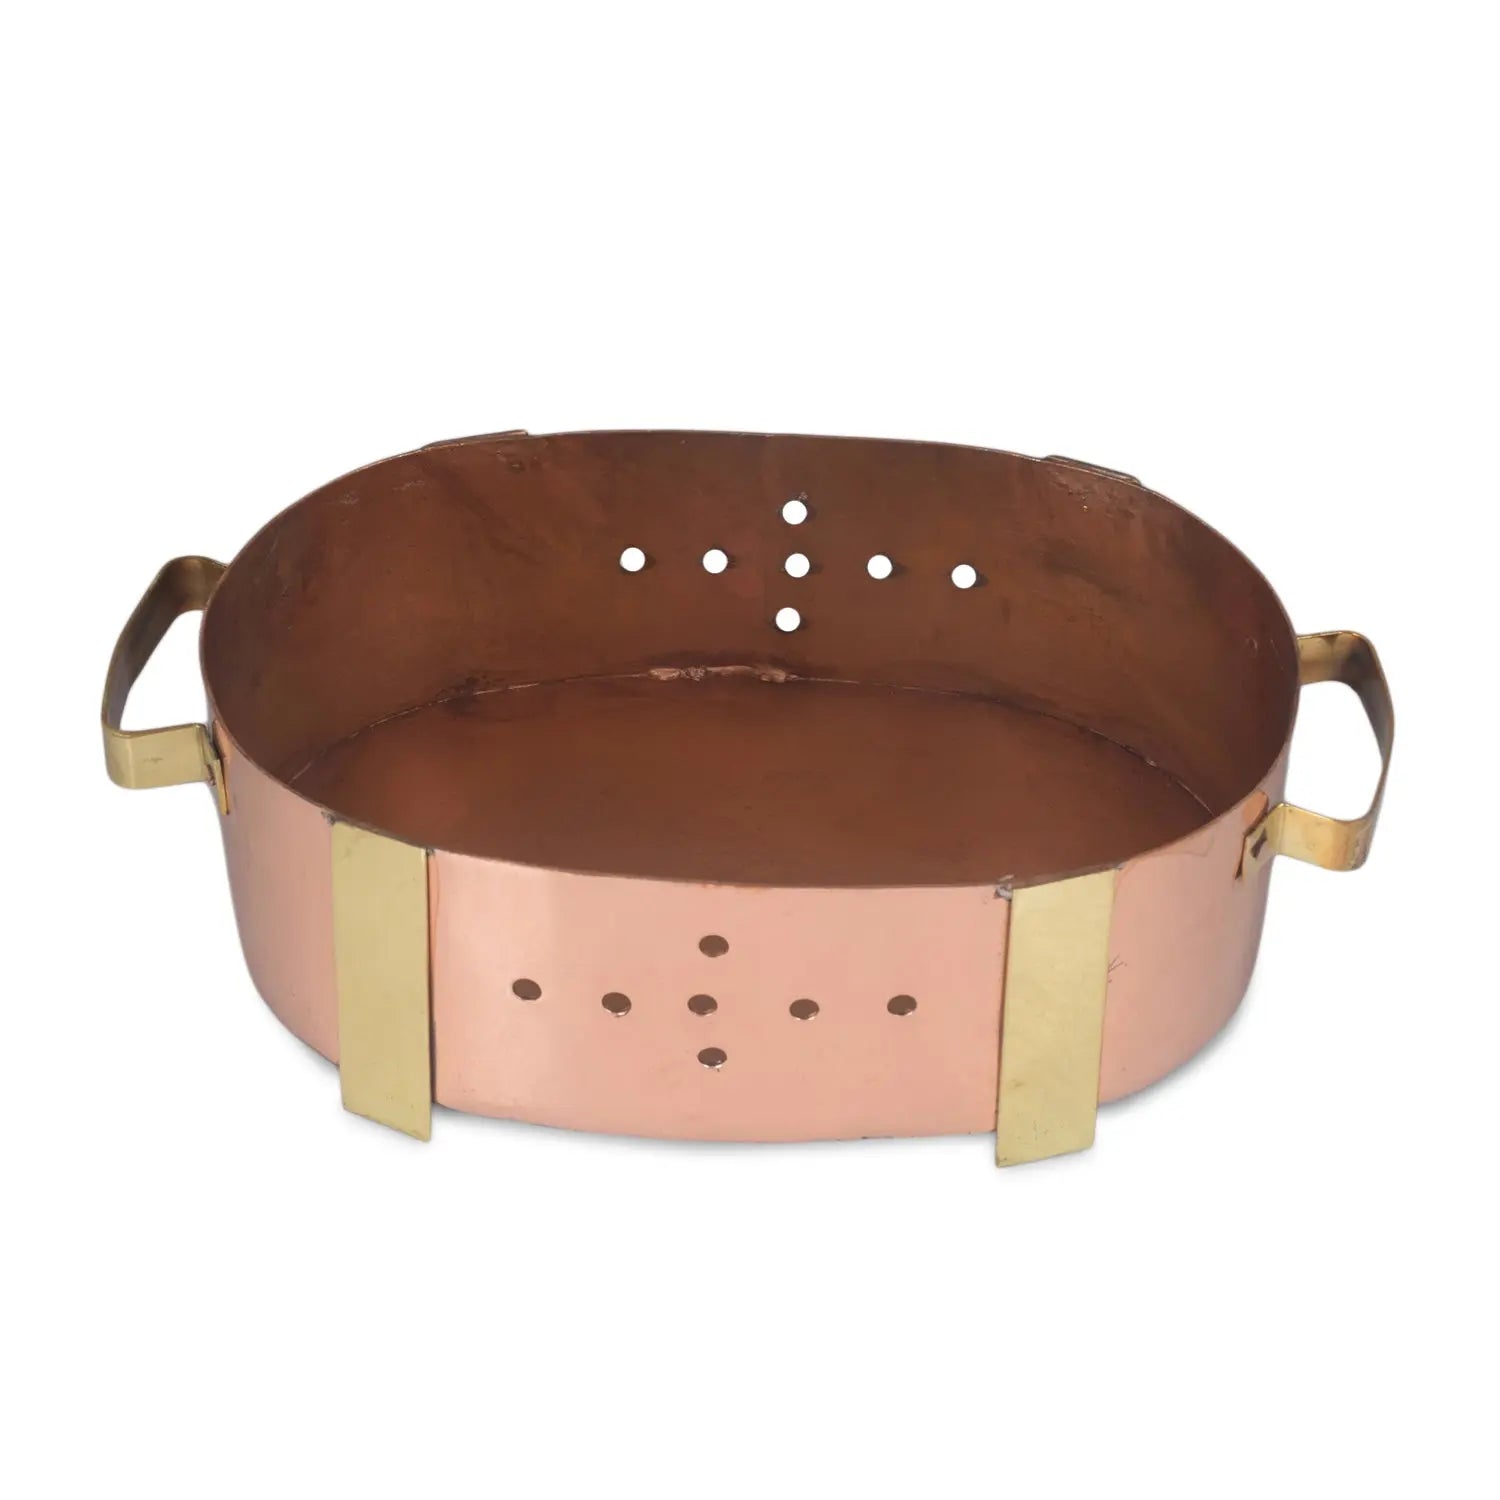 Pure Copper Snack Warmer Oval Shape For Parties - CROCKERY WALA AND COMPANY 